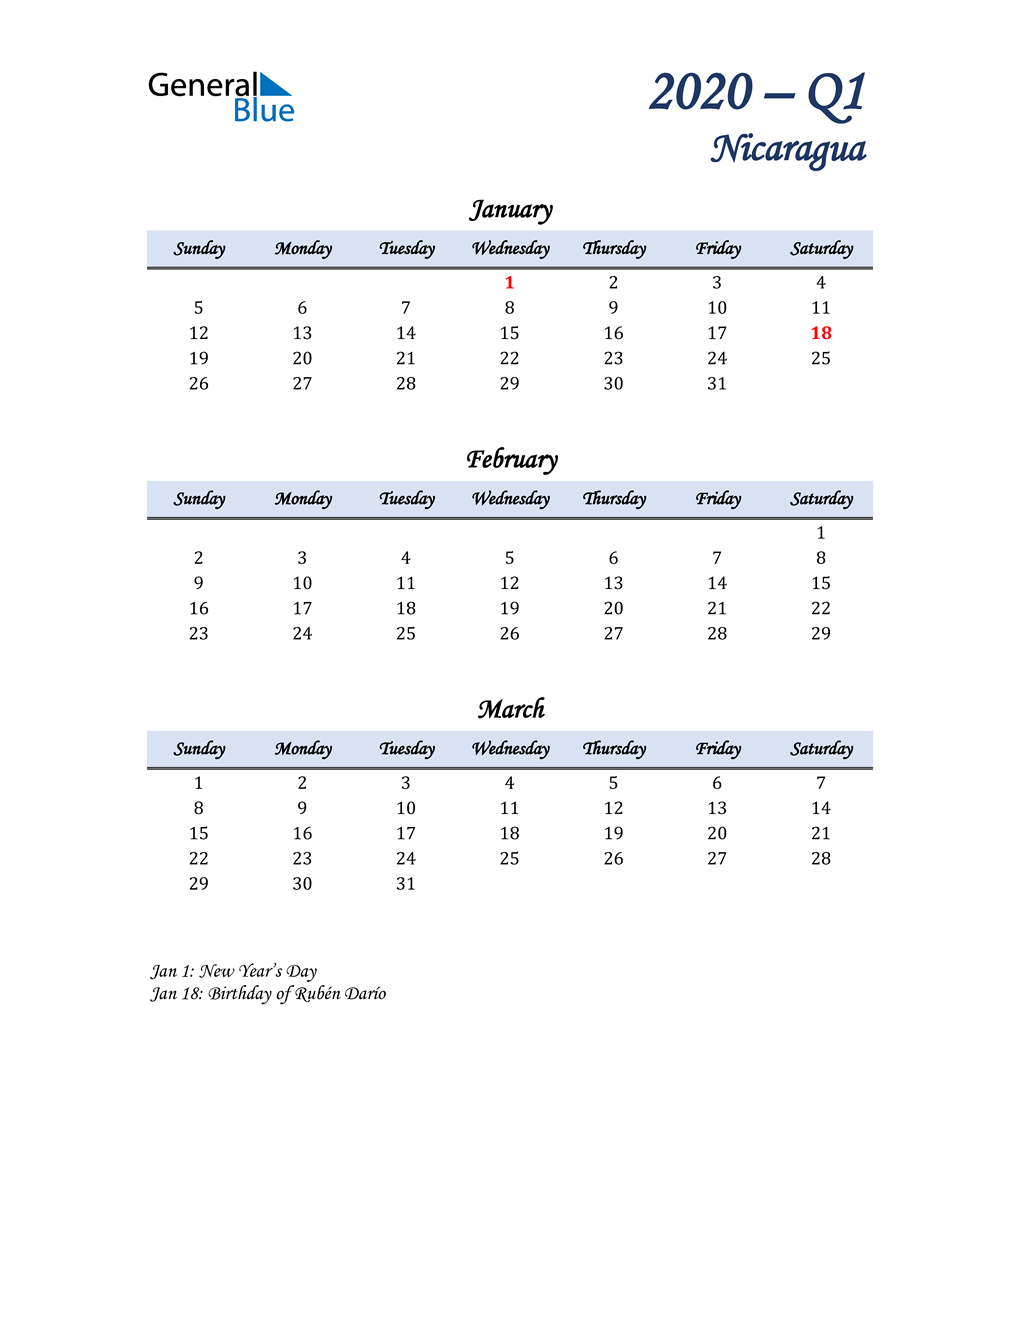  January, February, and March Calendar for Nicaragua